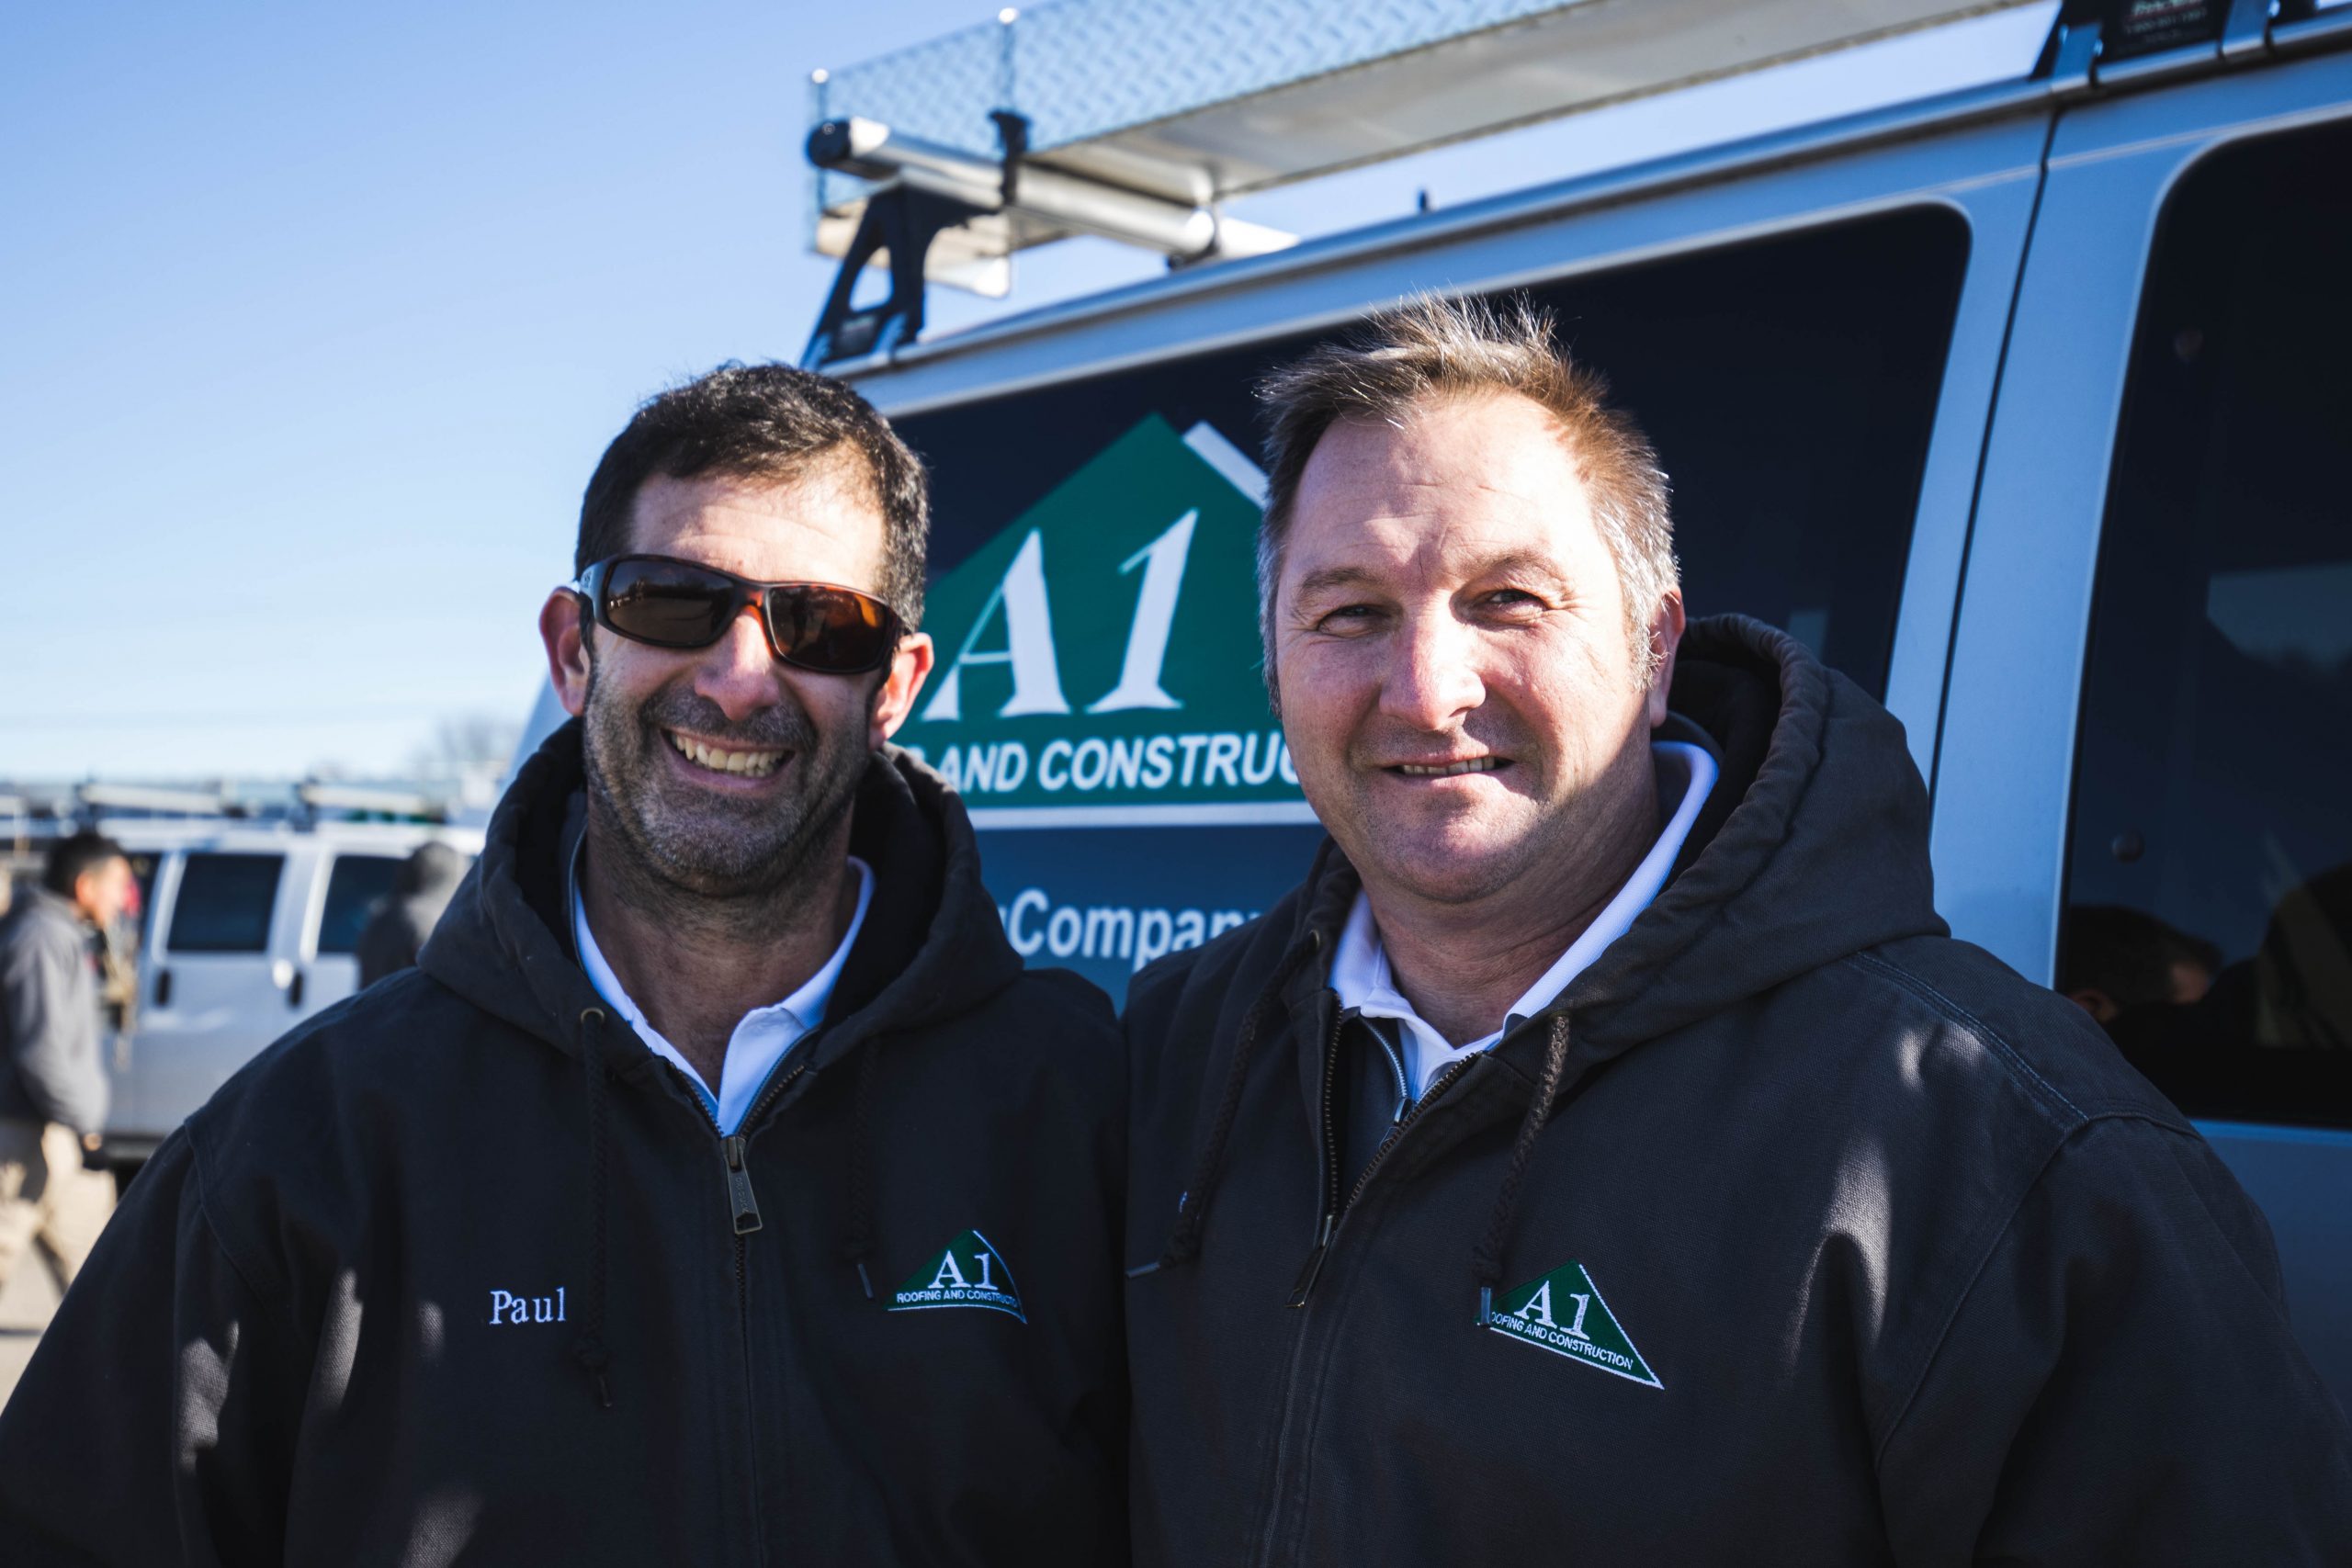 a1 roofing team